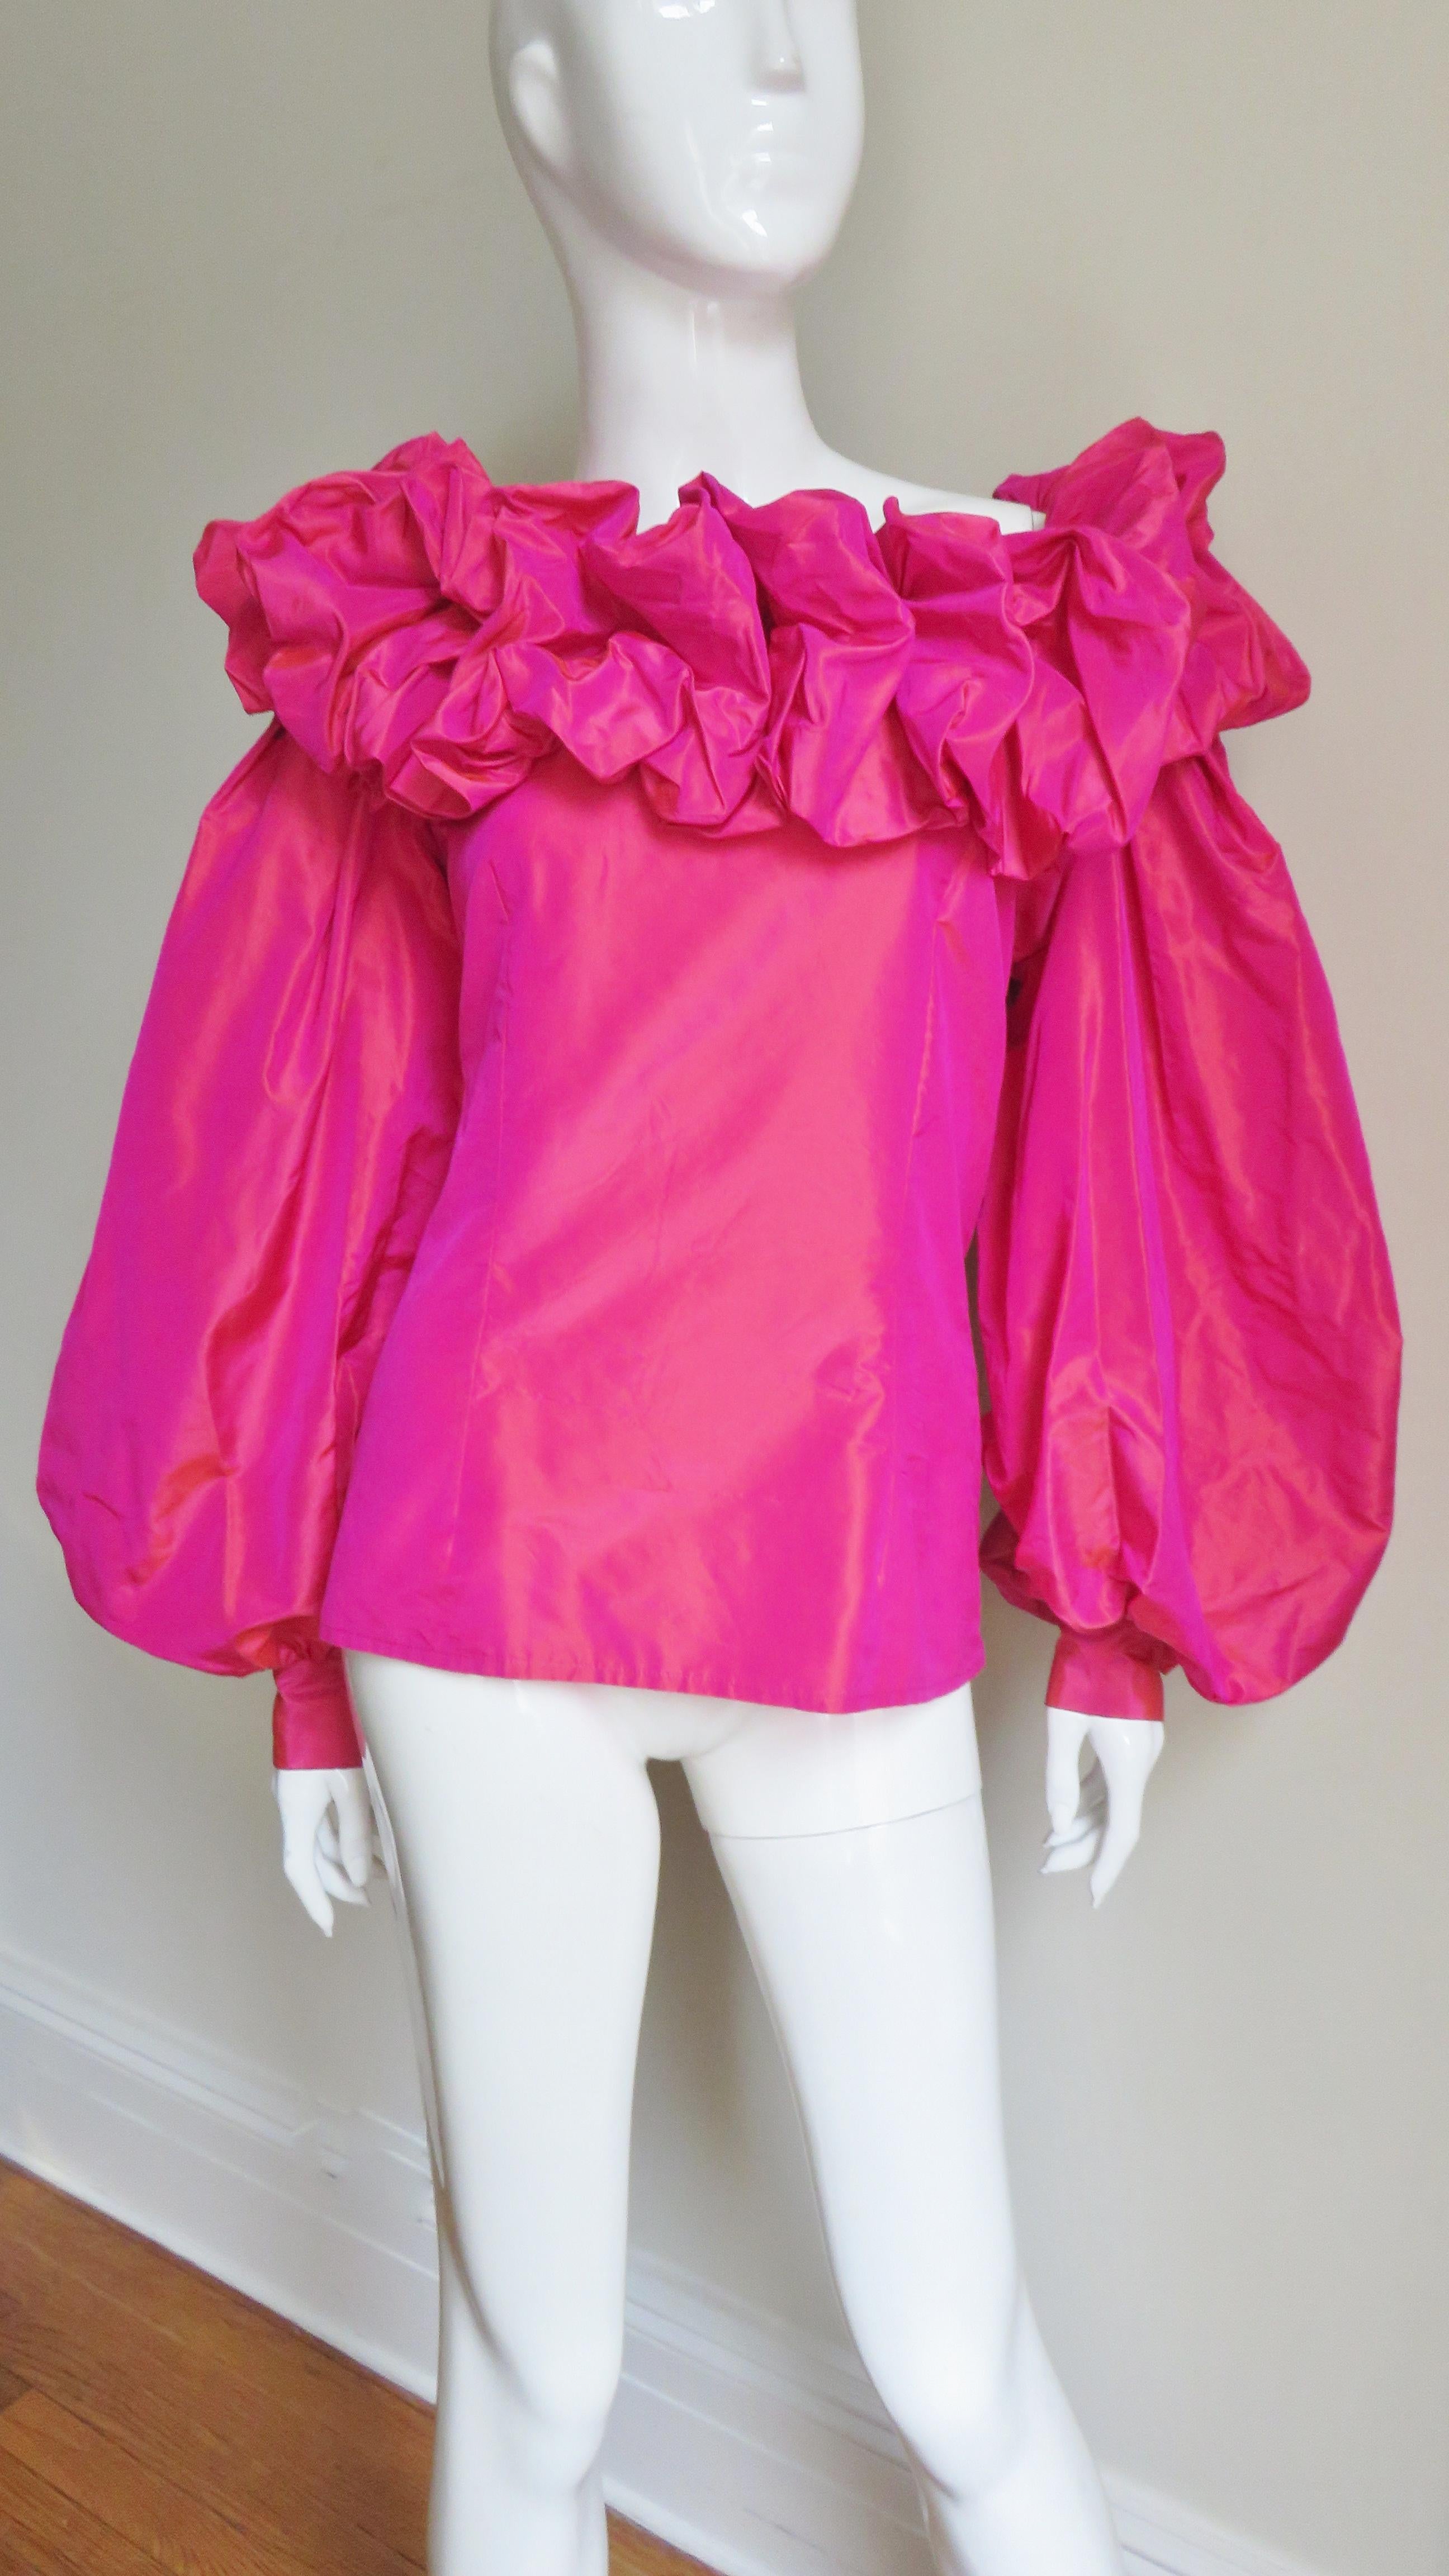 A gorgeous iridescent magenta off shoulder blouse, shirt, top from Guy Laroche.  It has a ruffled collar revealing the tops of the shoulders and full balloon sleeves with self covered button cuffs.  It has a side zipper and is new with tags.
Fits